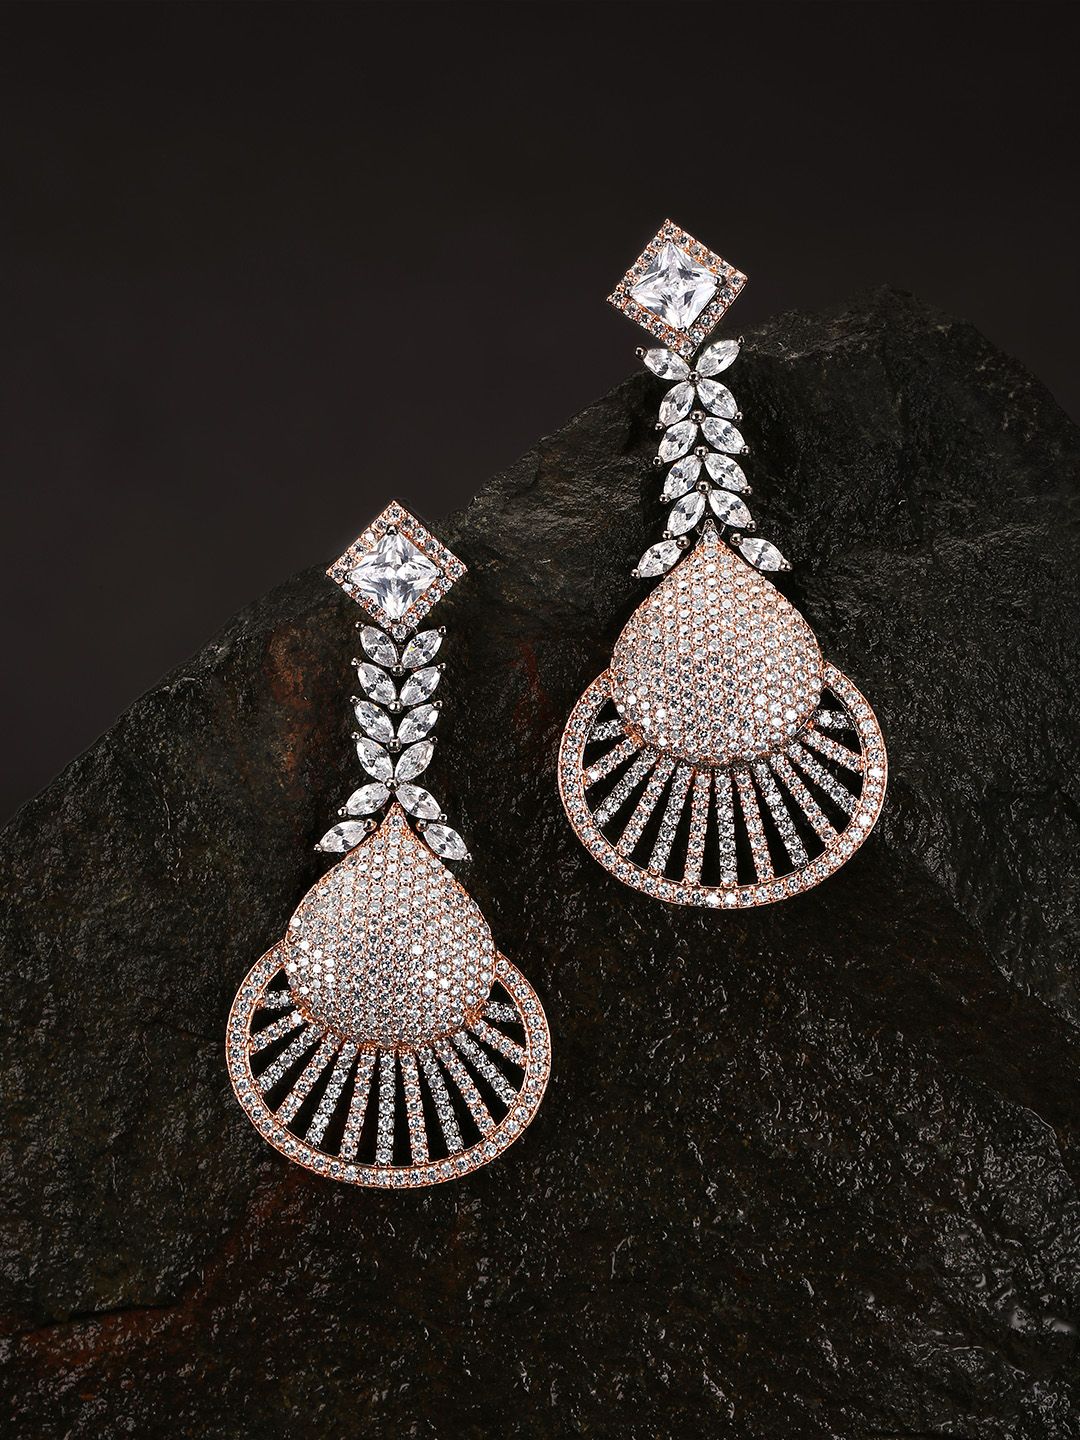 Priyaasi Rose Gold-Toned Gunmetal-Plated AD-Studded Handcrafted Contemporary Drop Earrings Price in India